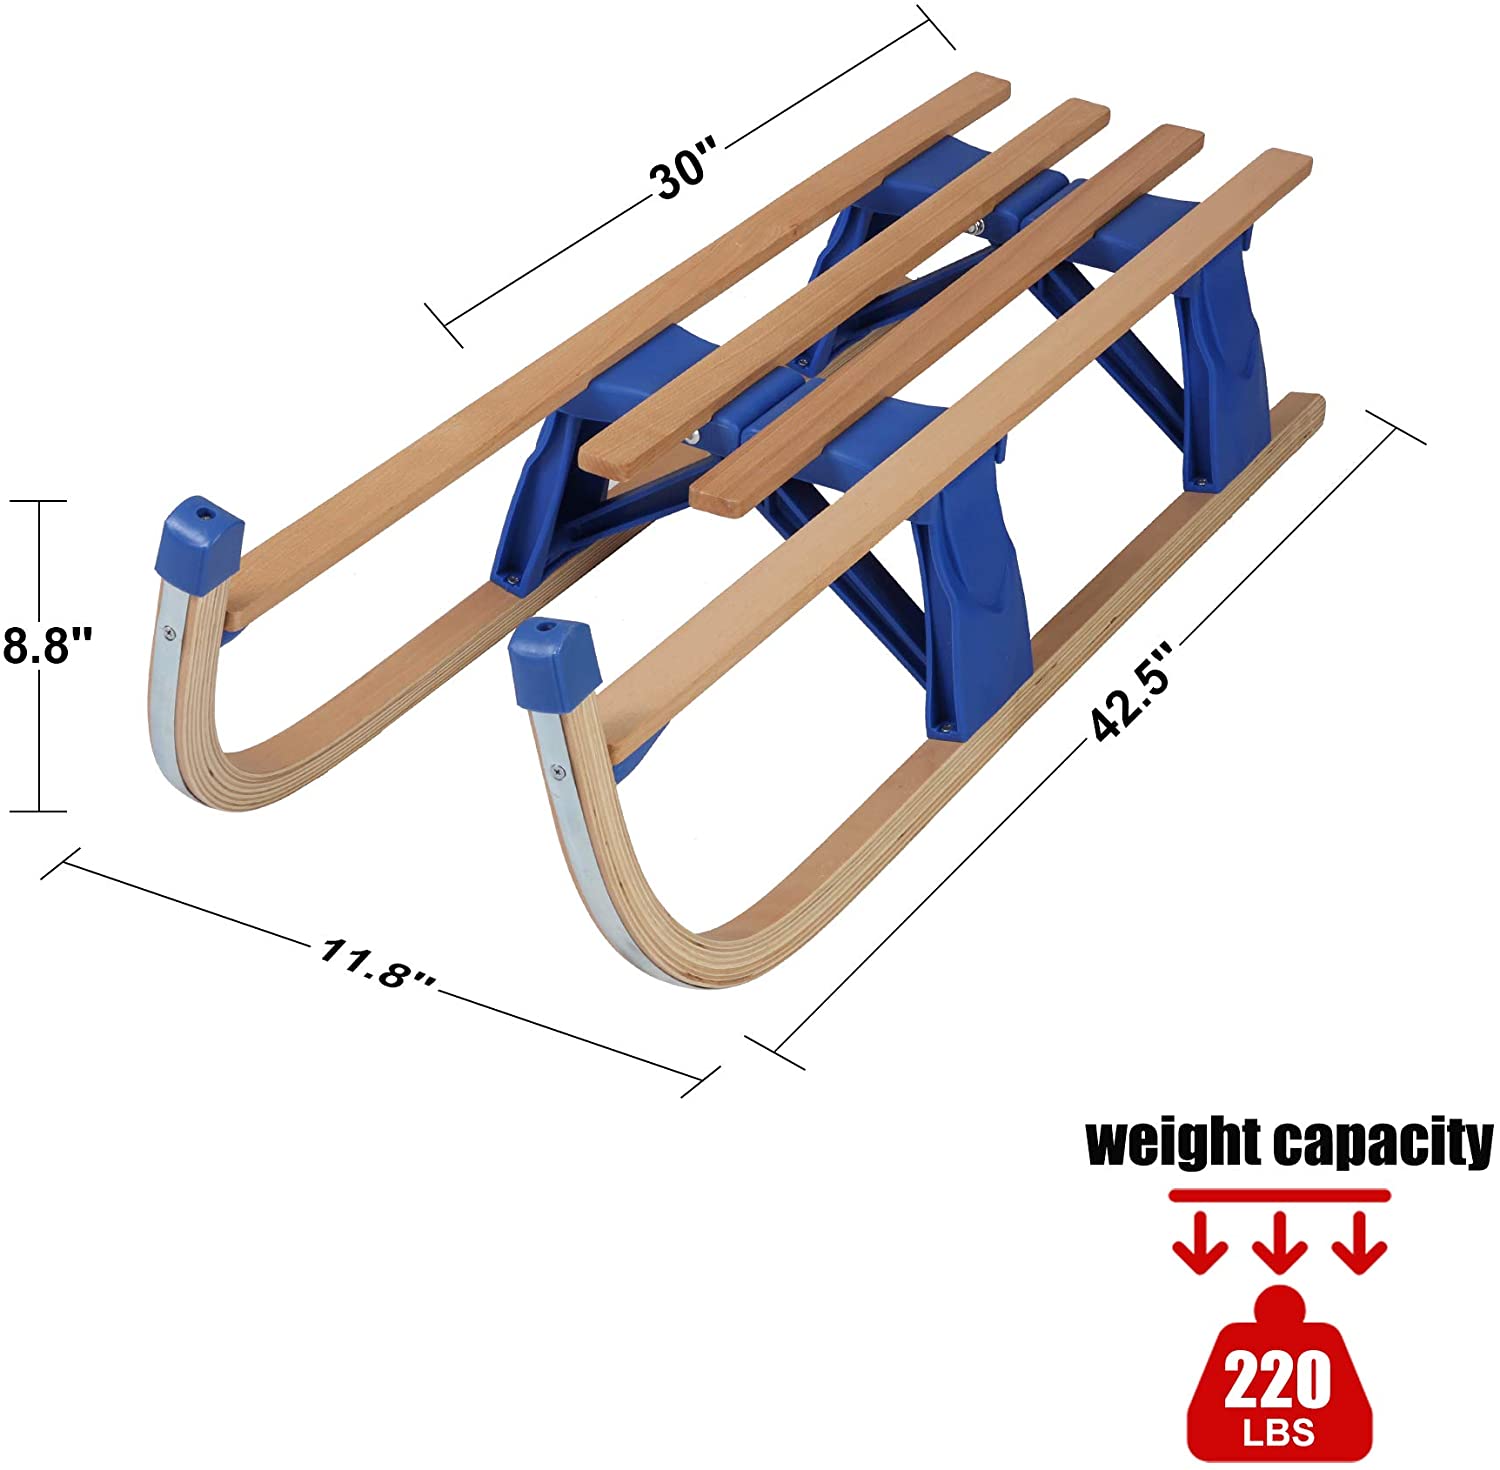 (Out of Stock) Sled Wooden Foldable For Kids And Adult Outdoor Play With A Pulling Rope 42 inch Weight Capacity, 220lbs